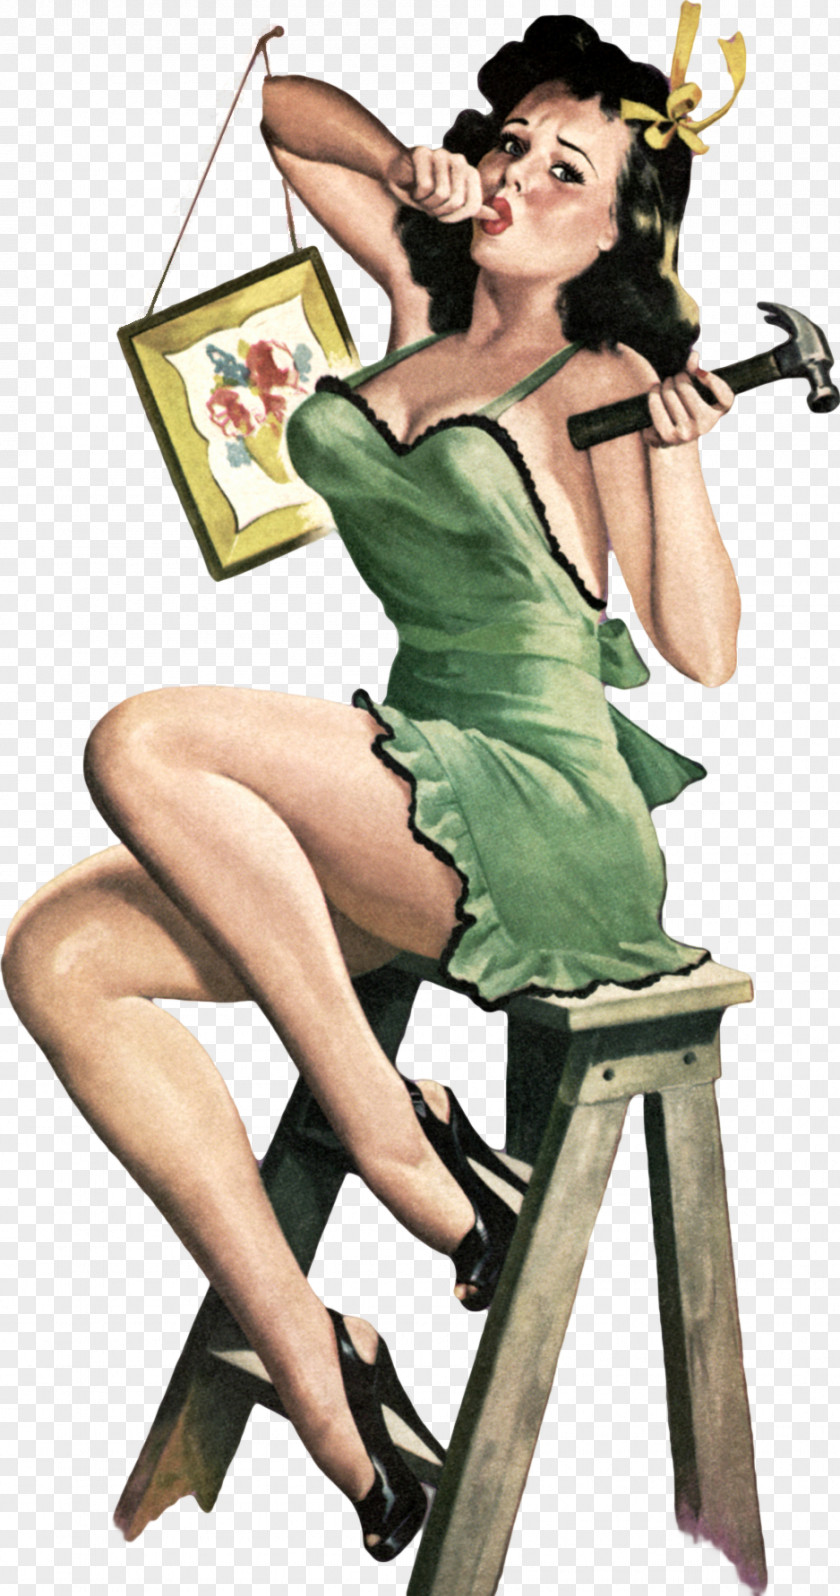 Bettie Page Pin-up Girl Painting PNG girl , pin up, woman sitting on stool holding hammer illustration clipart PNG